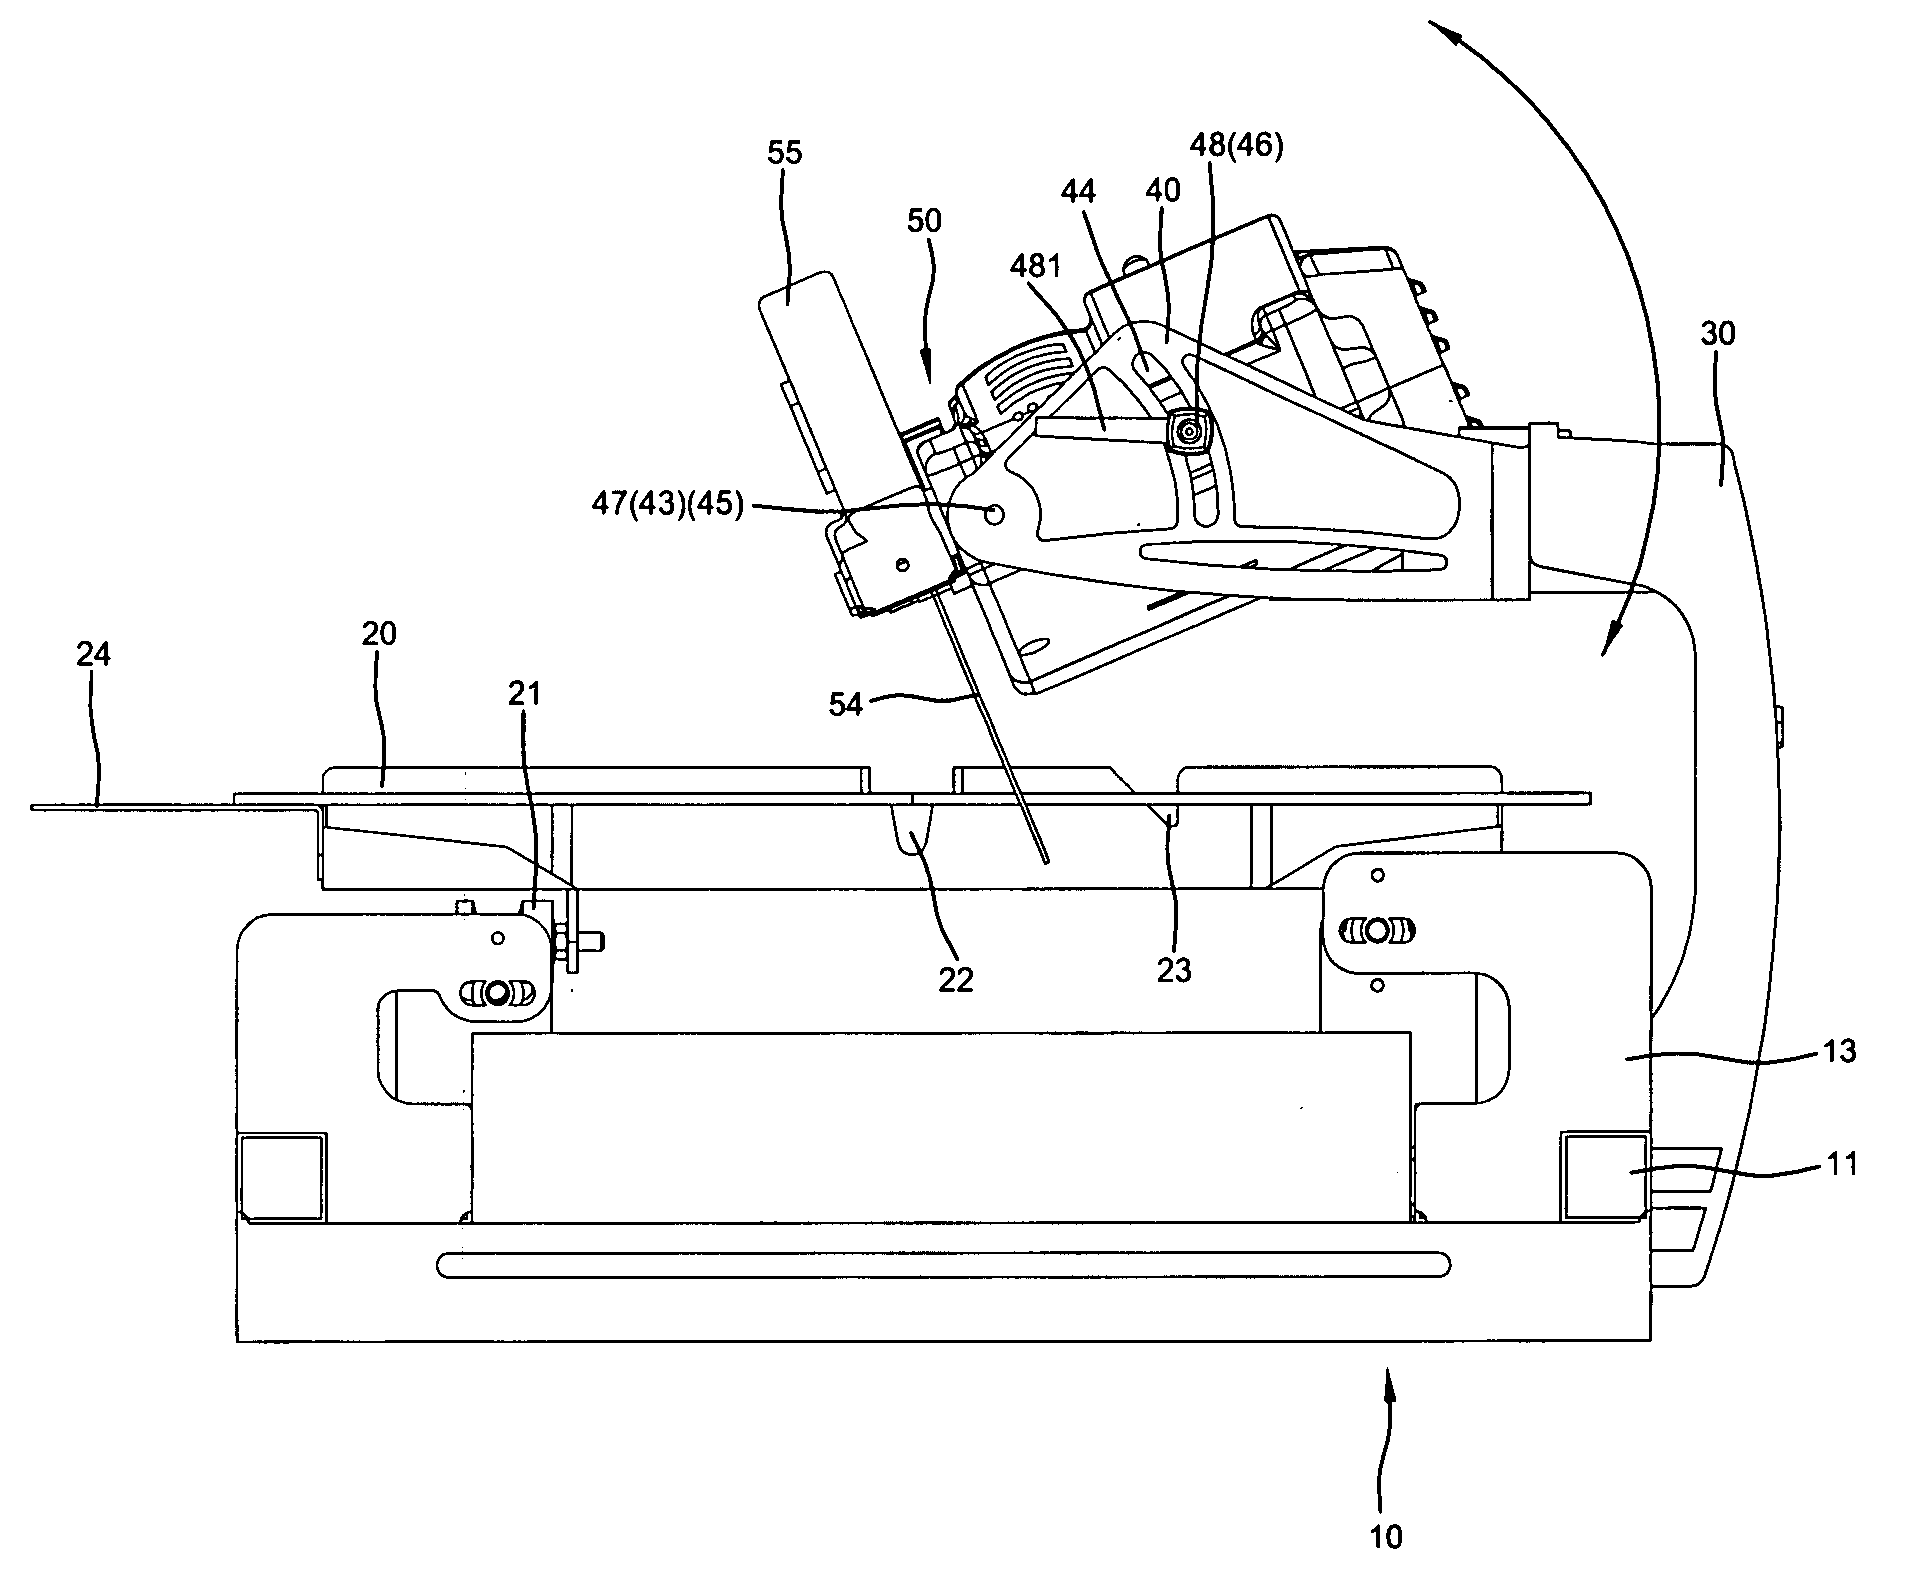 Blade angle adjustment device for a stone cutter